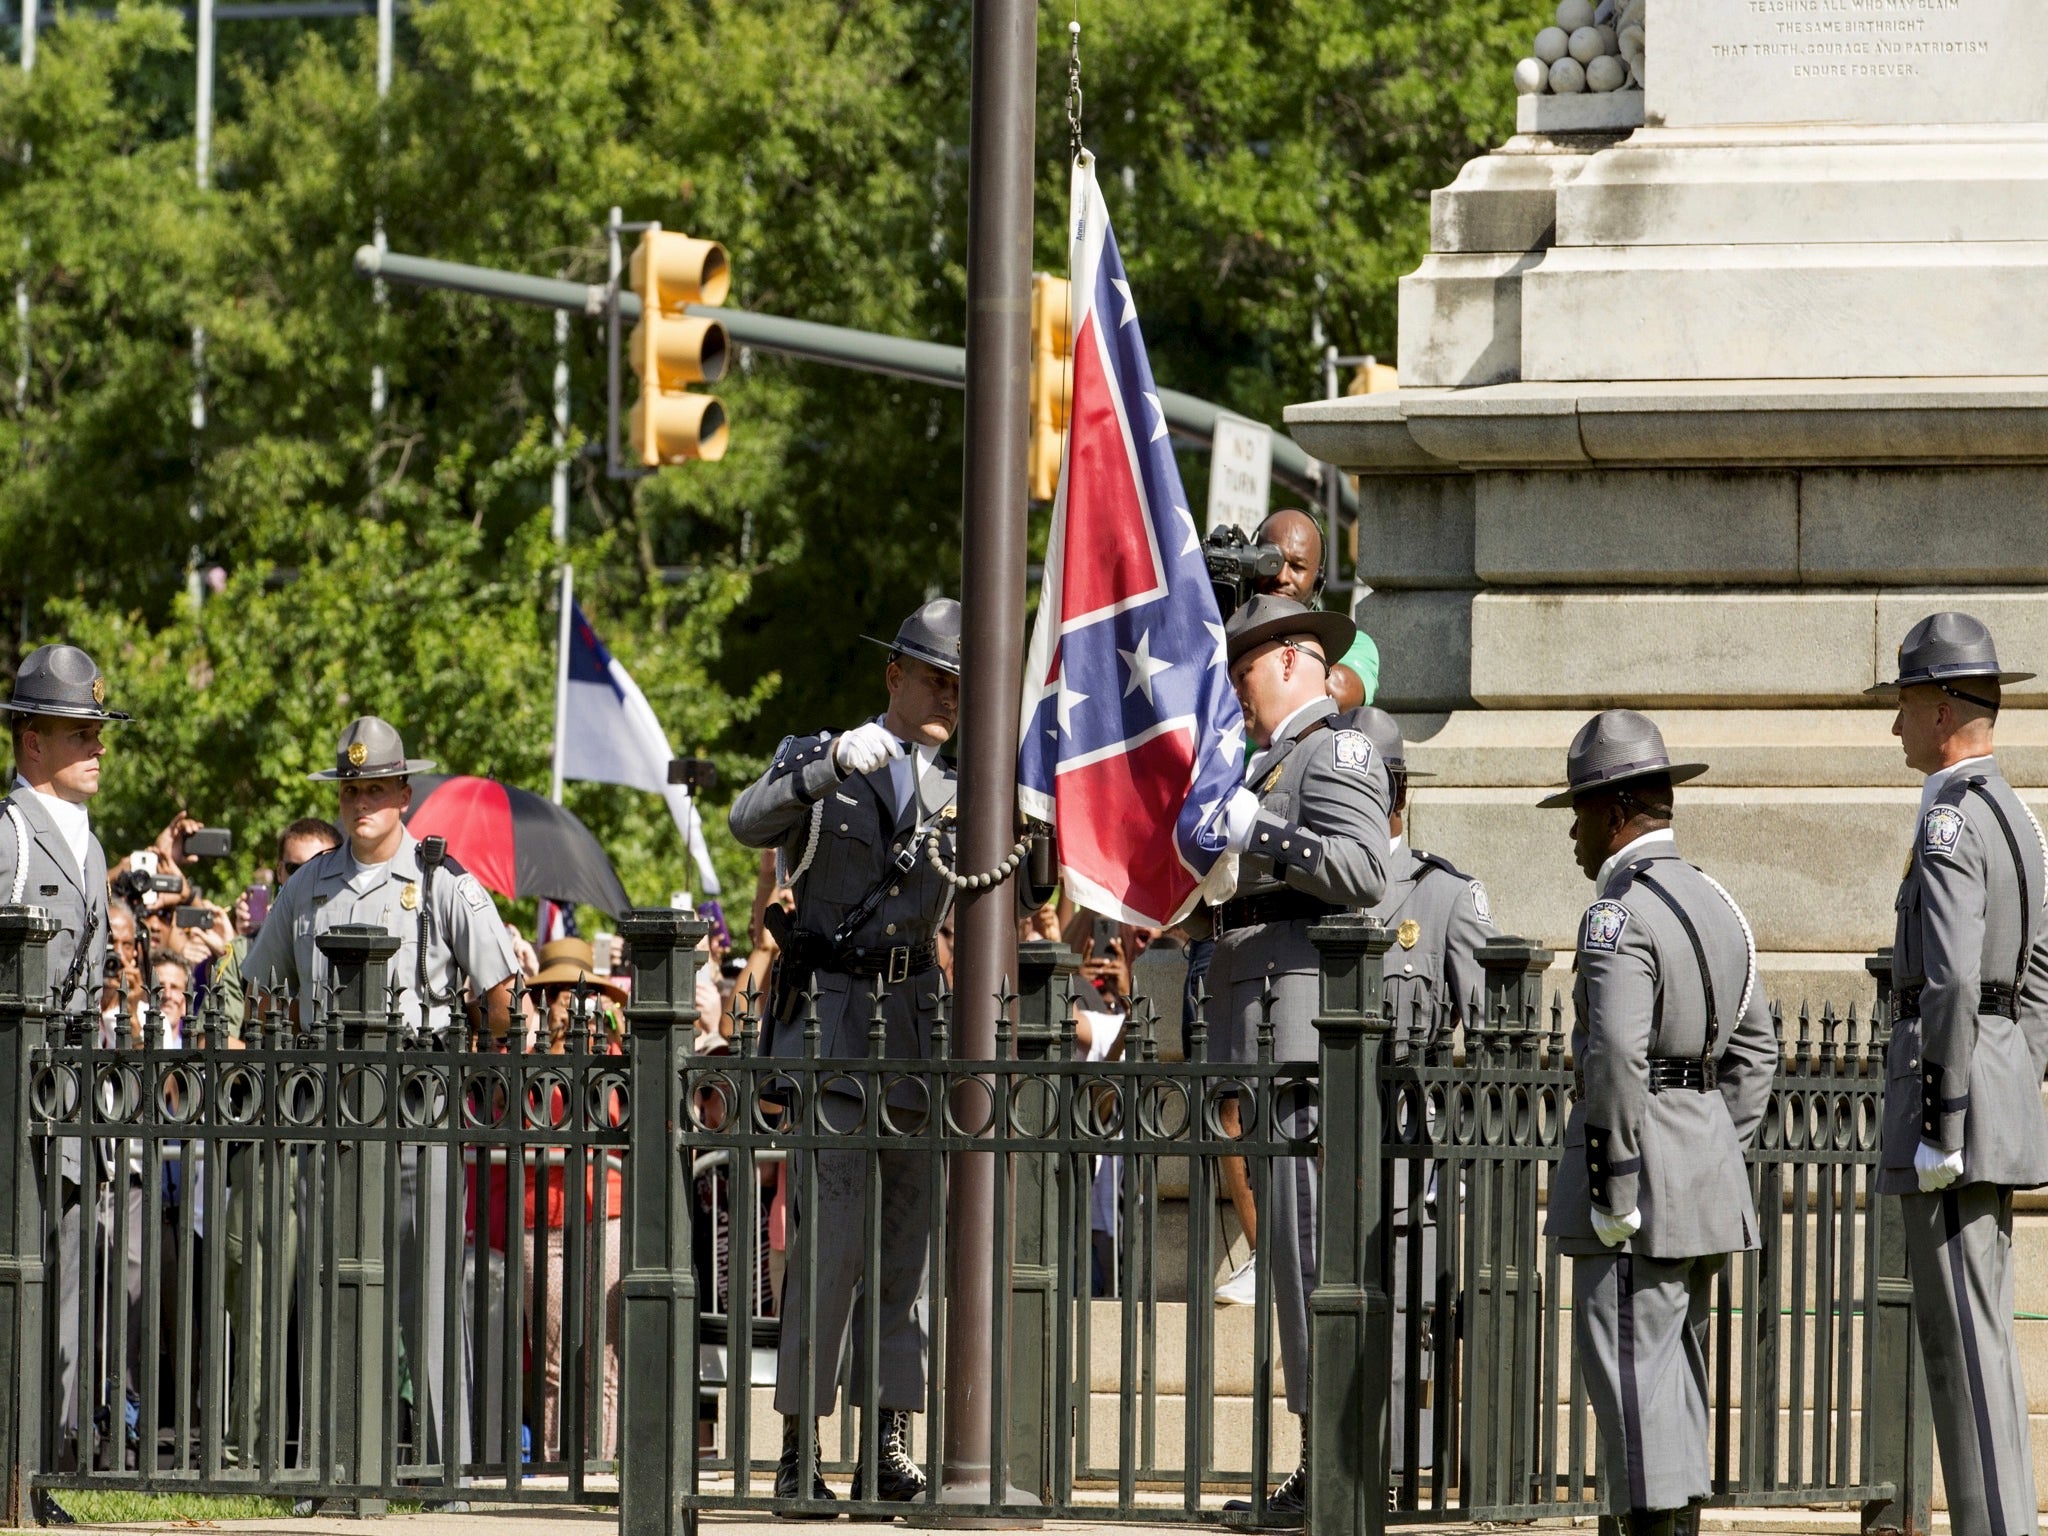 The Confederate flag came down on Friday morning